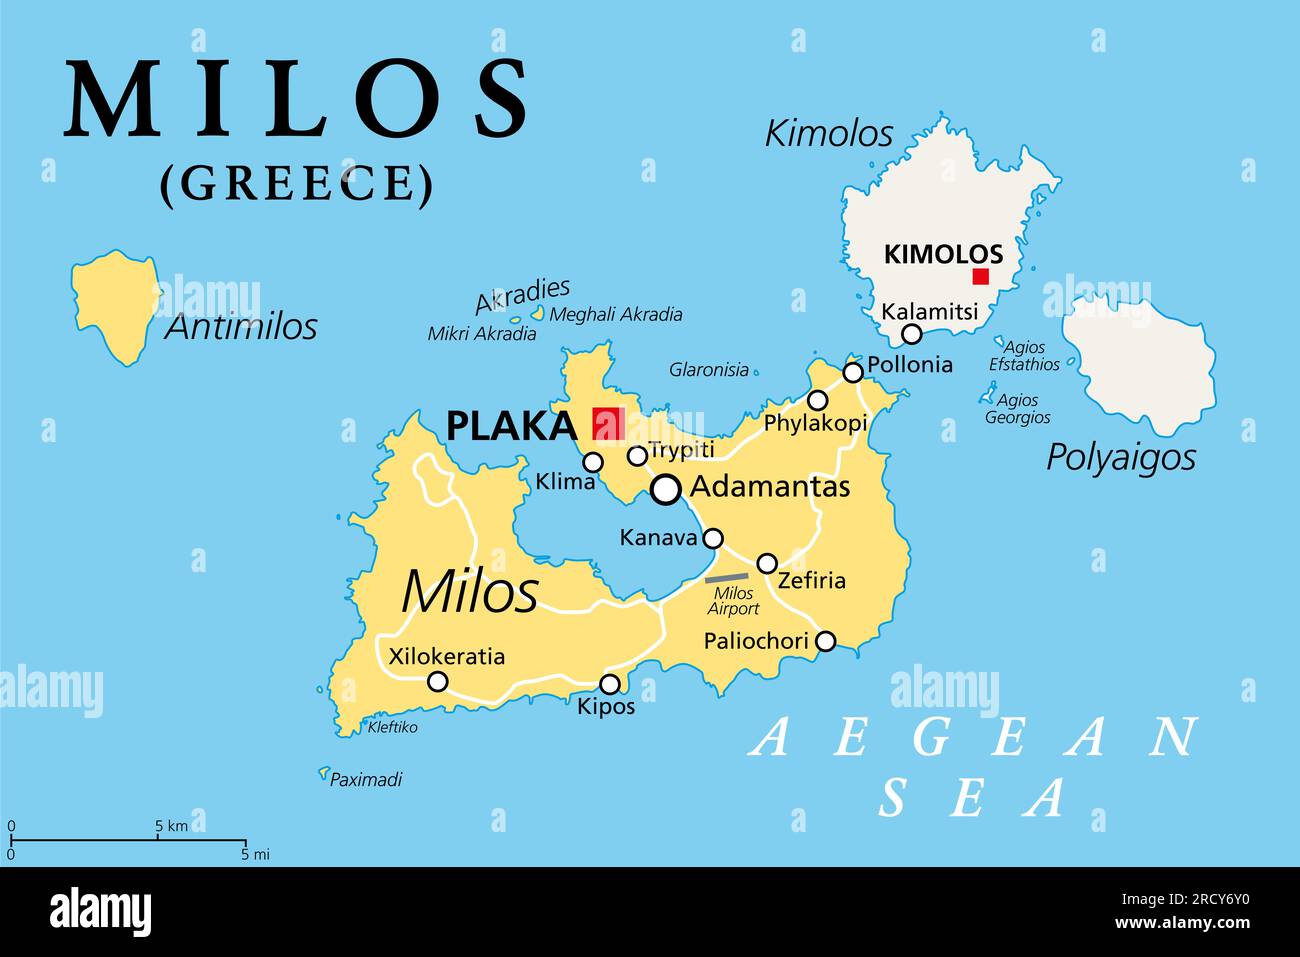 Milos, island of Greece, political map. Volcanic Greek island in the Aegean Sea and part of the Cyclades. With Antimilos, Kimolos and Polyaigos. Stock Photo